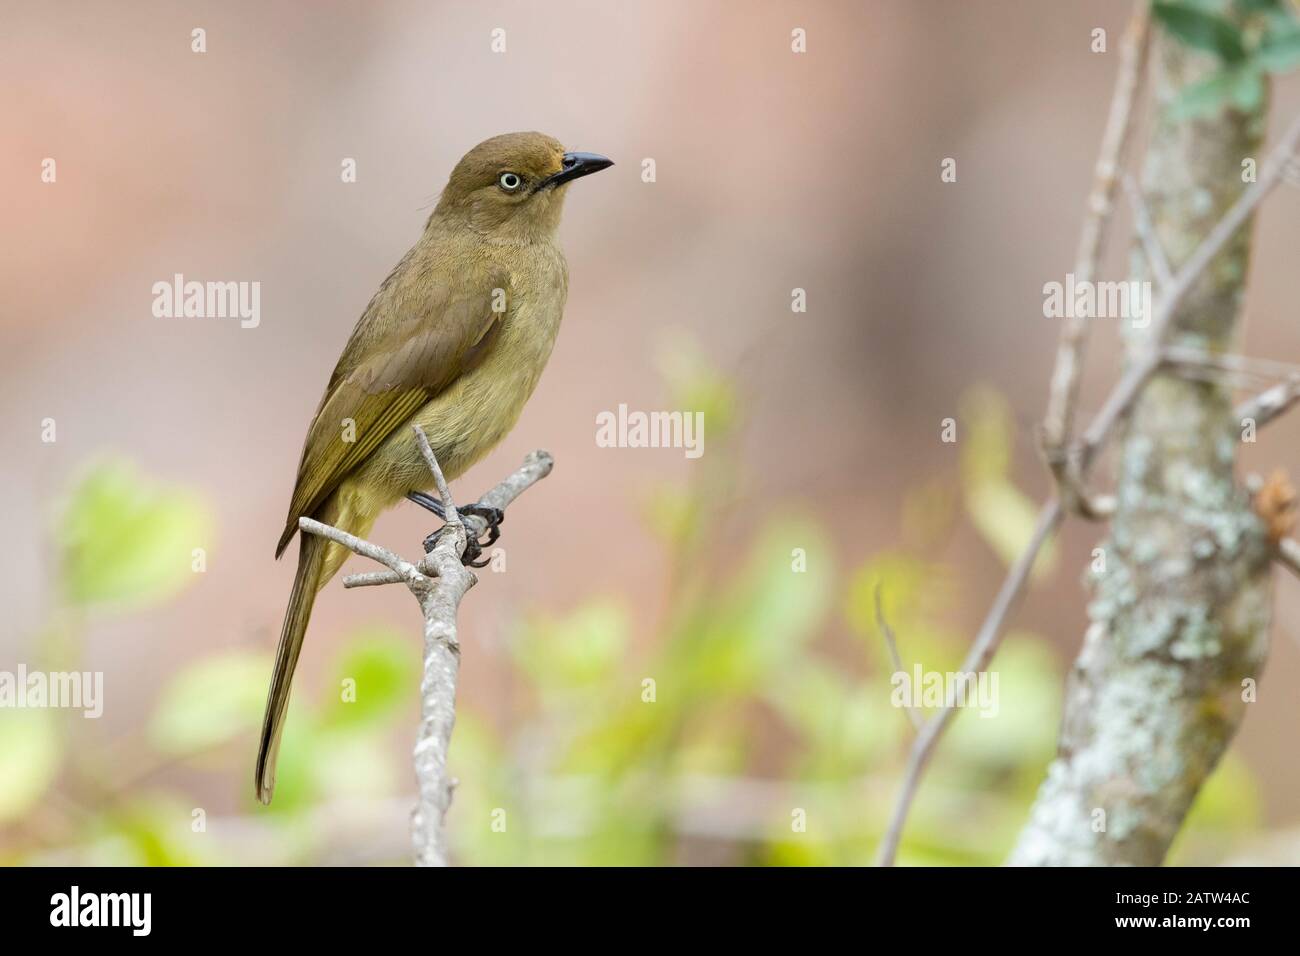 Sombre Greenbul (Andropadus importunus), side view of an adult perched on a branch, Mpumalanga, South Africa Stock Photo